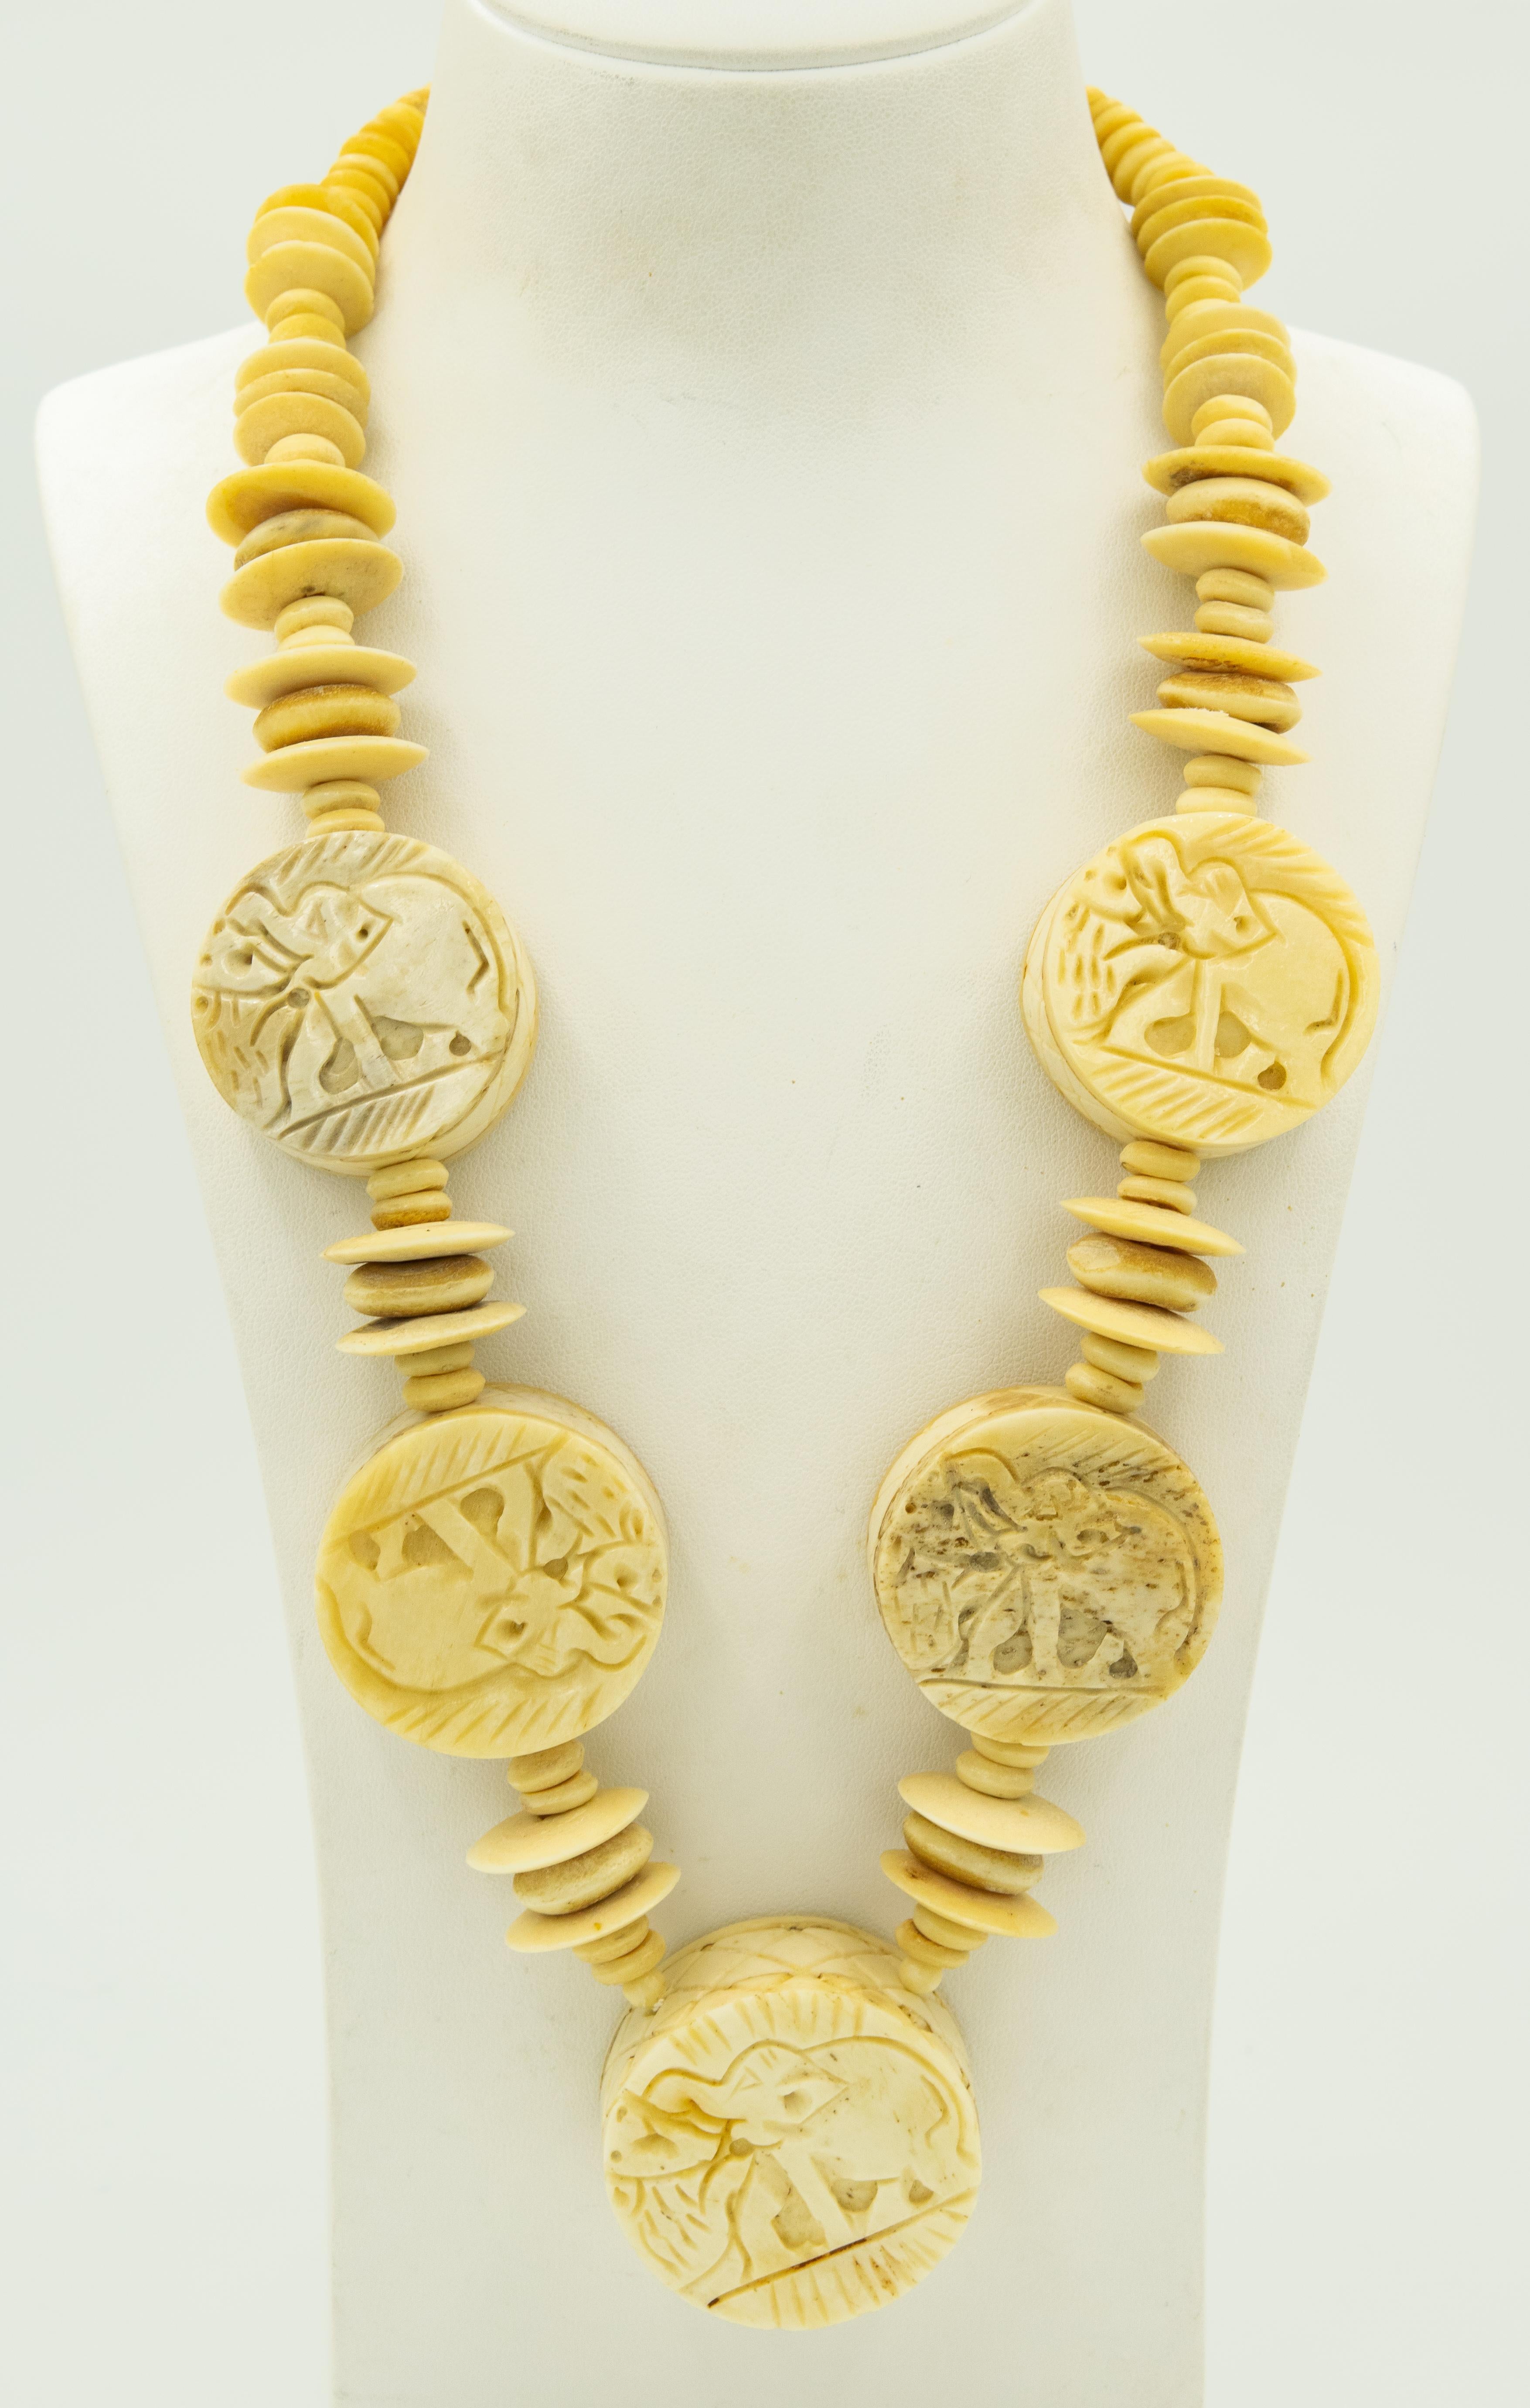 Carved Bone Elephant Necklace and Elephant and Lion Bone Bangle Bracelet Set In Good Condition For Sale In Miami Beach, FL